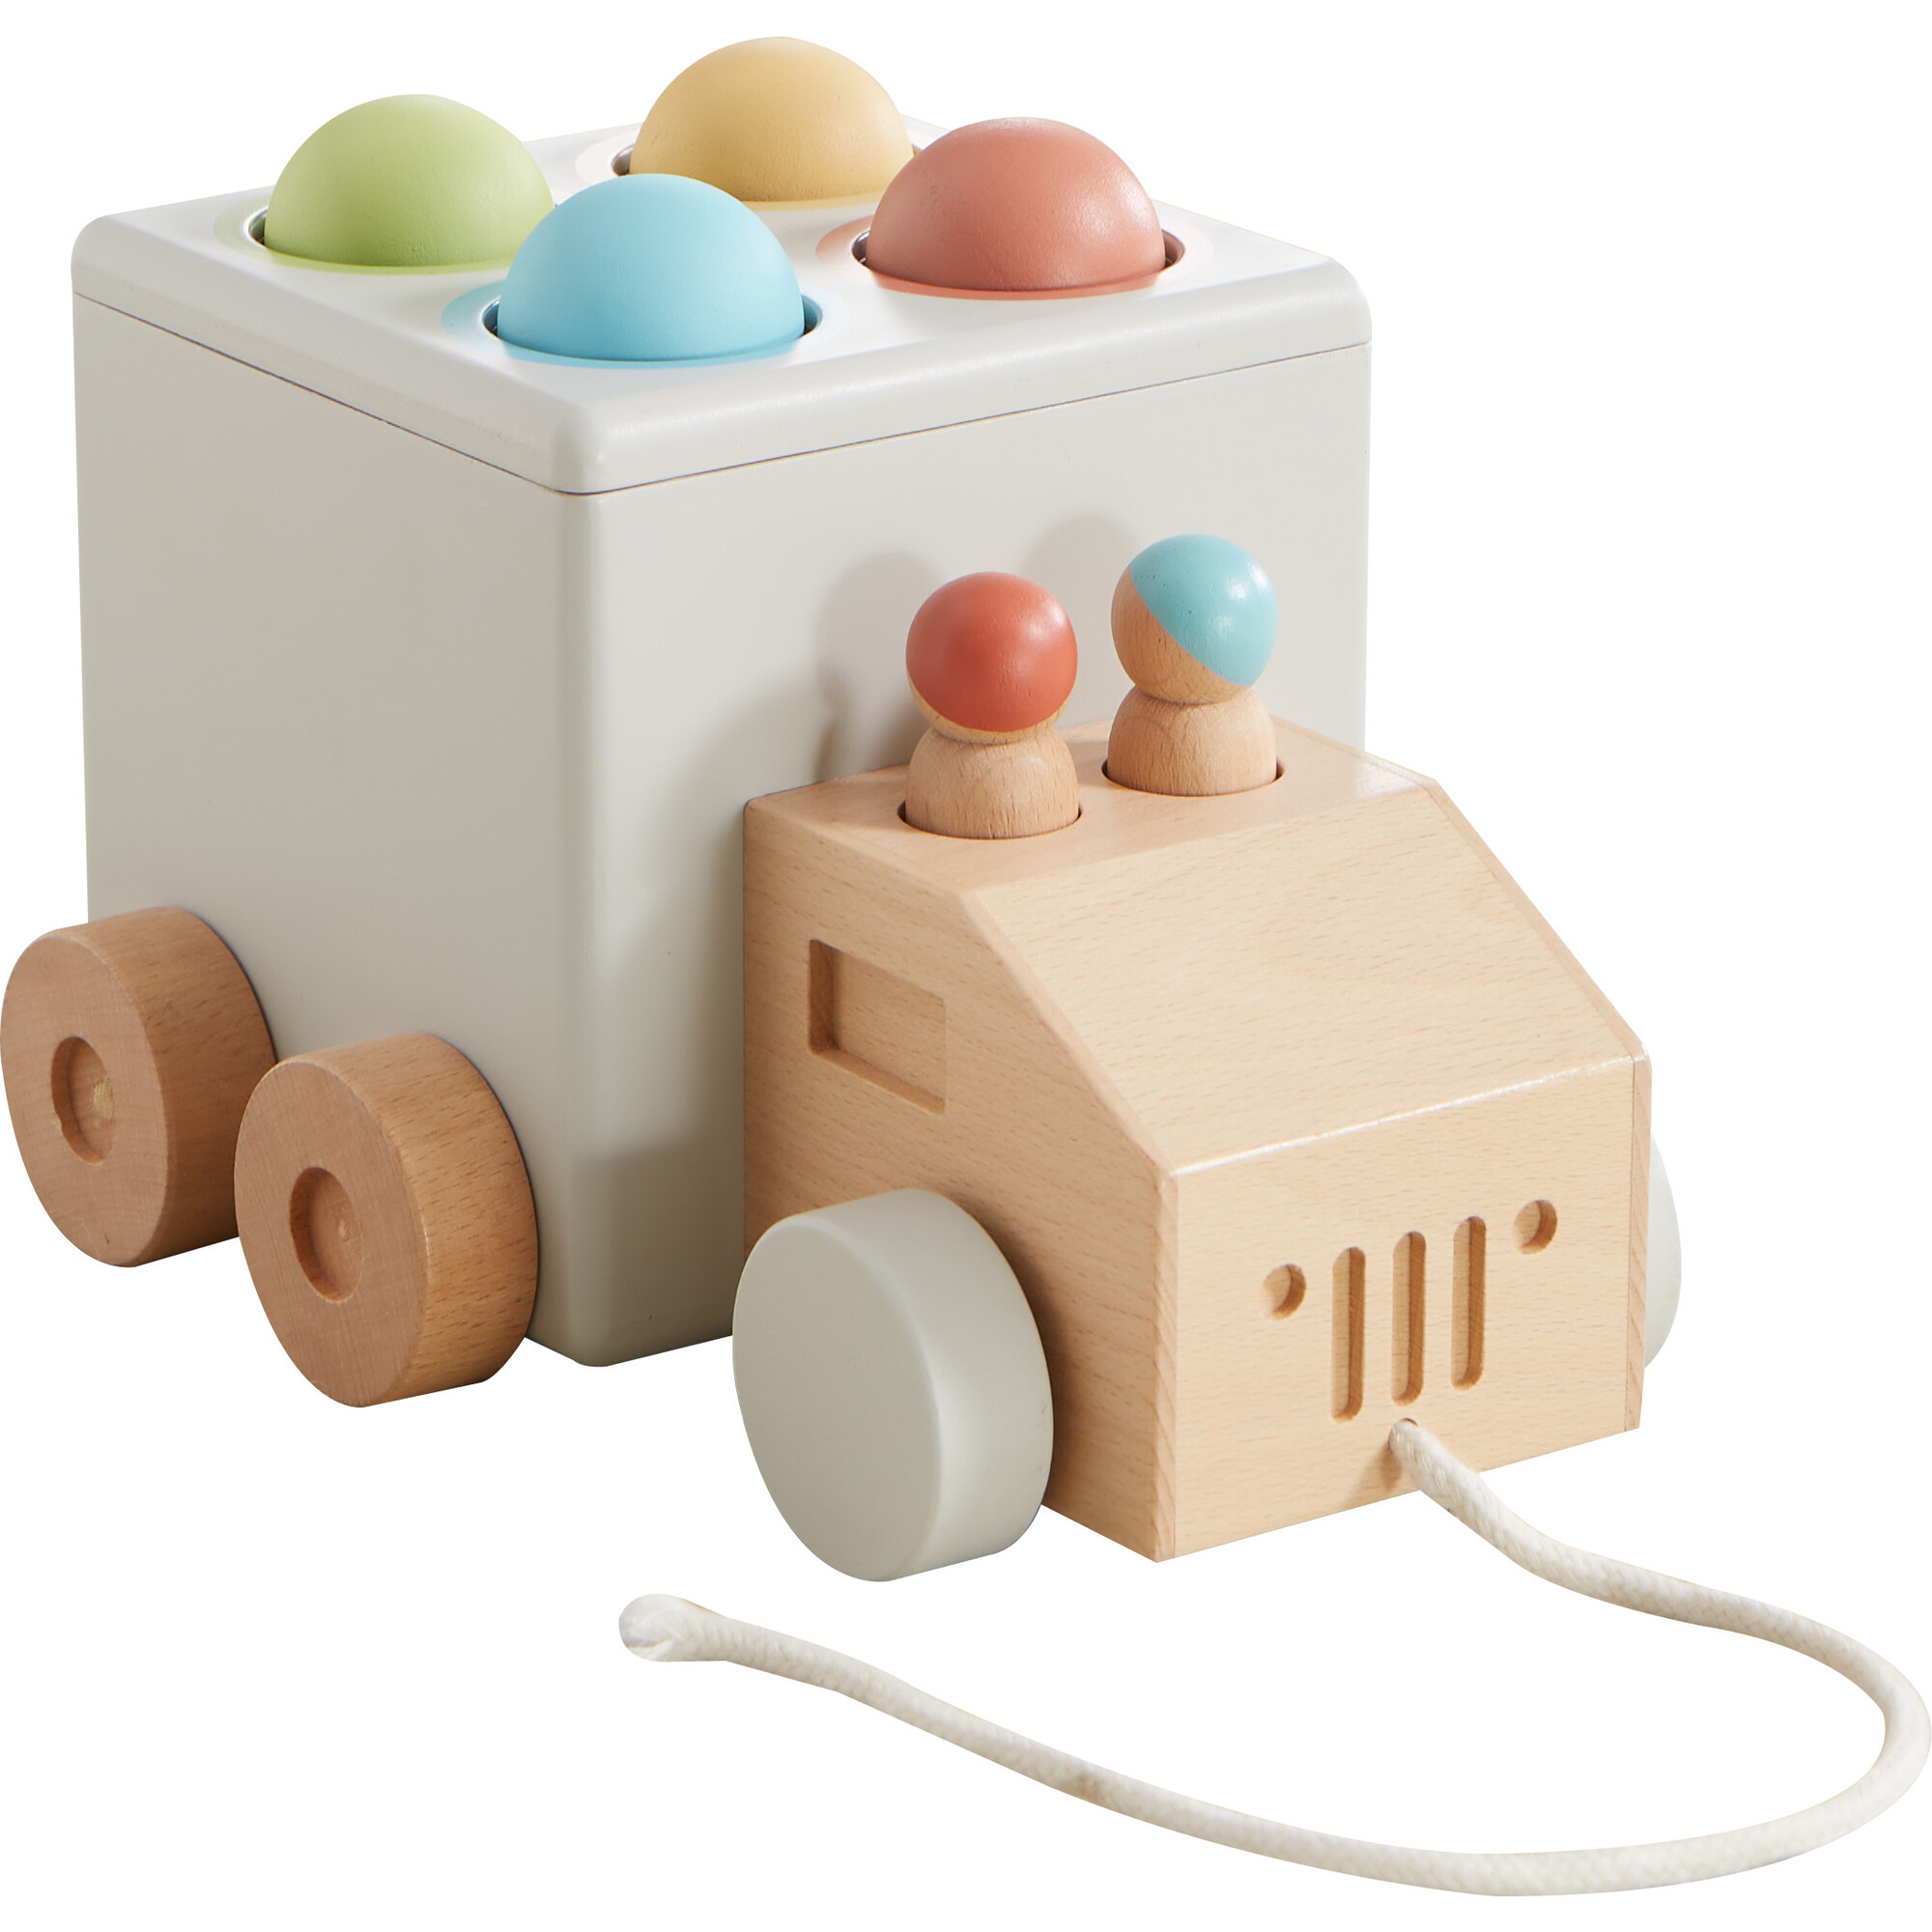 Wonder & Wise by Asweets Baby Busy Box Toy